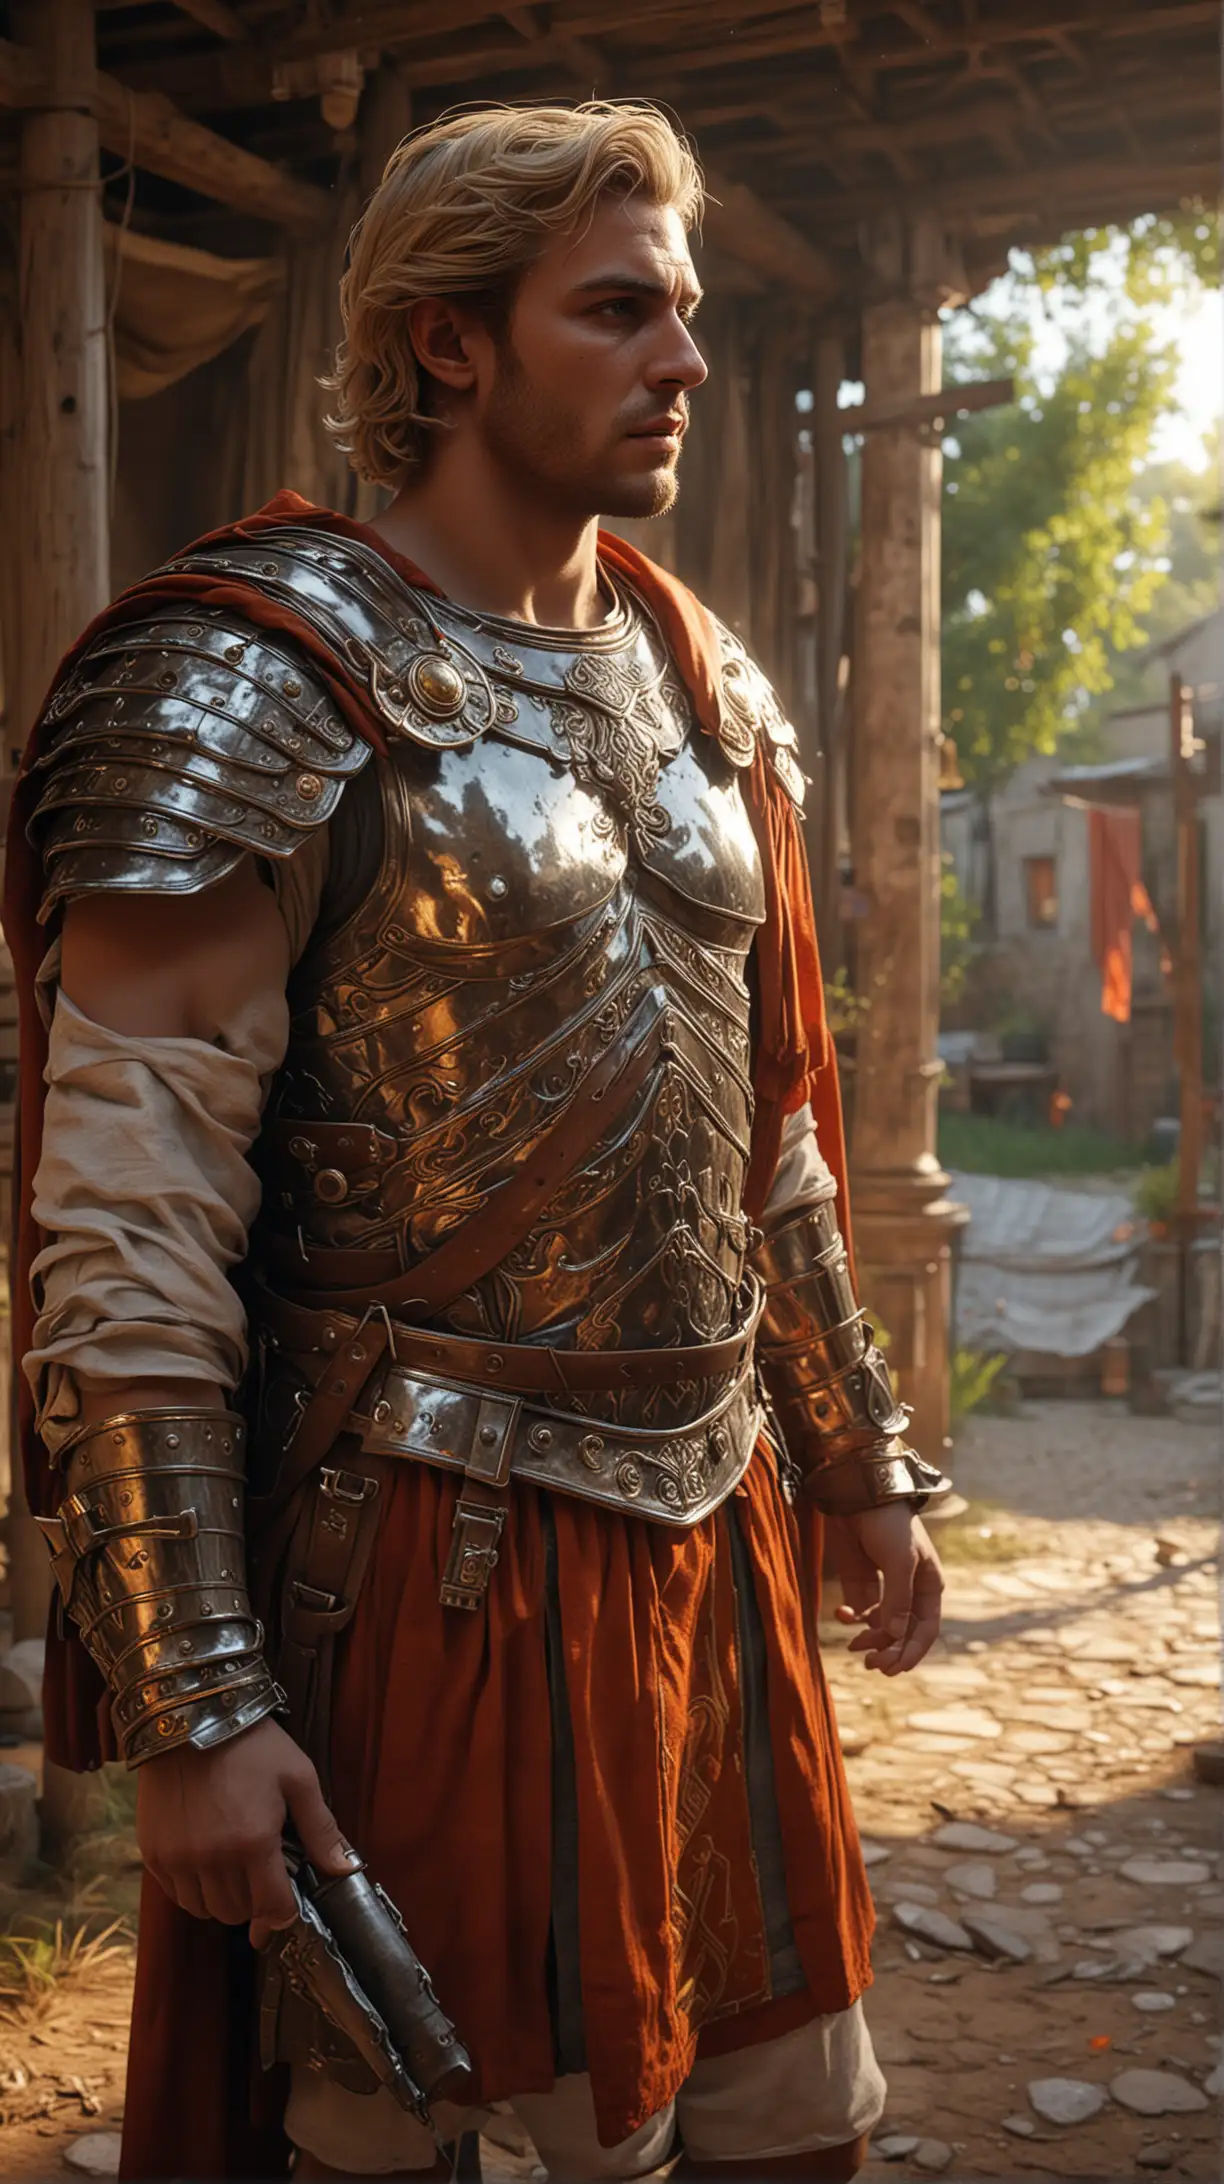 a gorgeous Ancient Roman warrior nobleman, 22 years old, with shoulder-length light-blonde hair, muscled body, wearing Ancient Roman diamond armor over an Ancient Roman orange tunic and tunica, walking in an Ancient Roman tent army camp - full detail, long shot, wide angle, vivid color, photoshoot, Unreal Engine 5, Cinematic, Color Grading, portrait Photography, Ultra - Wide Angle, Depth of Field, hyper - detailed, beautifully color - coded, insane details, intricate details, beautifully color graded, Unreal Engine, Cinematic, Color Grading, Editorial Photography, Photography, Photoshoot, Shot on 70mm lens, Depth of Field, DOF, Tilt Blur, Shutter Speed 1/ 1000, F/ 22, White Balance, 32k, Super - Resolution, Megapixel, Pro Photo RGB, VR, Good, Massive, Half rear Lighting, Backlight, Natural Lighting, Incandescent, Optical Fiber, Moody Lighting, Cinematic Lighting, Studio Lighting, Soft Lighting, Volumetric, Conte - Jour, Beautiful Lighting, Accent Lighting, Global Illumination, Screen Space Global Illumination, Ray Tracing Global Illumination, Optics, Scattering, Glowing, Shadows, Rough, Shimmering, Ray Tracing Reflections, Lumen Reflections, Screen Space Reflections, Diffraction Grading, Chromatic Aberration, GB Displacement, Scan Lines, R a y Traced, Ray Tracing Ambient Occlusi on, Anti - Aliasing, FKAA, TXAA, RTX, SSAO, Shaders, OpenGL - Shaders, GLSL - Shaders, Post Processing, Post - Production, Cell Shading, Tone Mapping, CGI, VFX, SFX, insanely detailed and intricate, hyper maximalist, elegant, hyper realistic, super detailed, photography, Hyper realistic, volumetric, photorealistic, ultra photoreal, ultra - detailed, intricate details, 8K, super detailed, full color, ambient occlusion, volumetric lighting, high contrast,